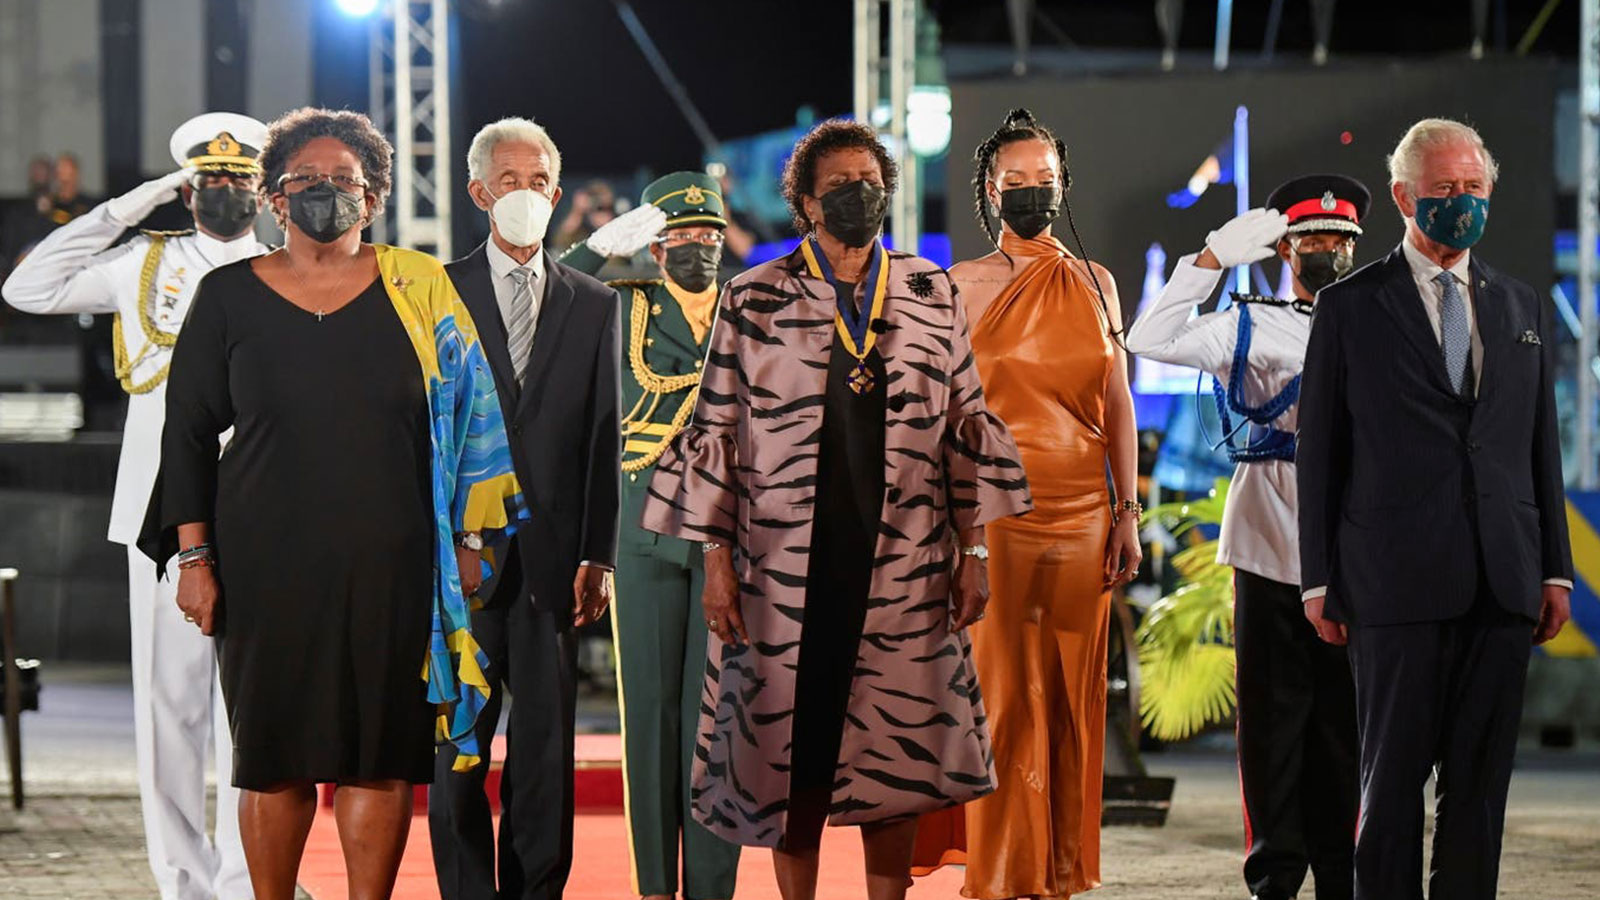 The prime minister of Barbados, Mia Mottley, cricket legend Sir Garfield Sobers, the president of Barbados, Dame Sandra Mason, Rihanna, and Prince Charles attend the presidential inauguration ceremony at Heroes Square on 30 November in Bridgetown